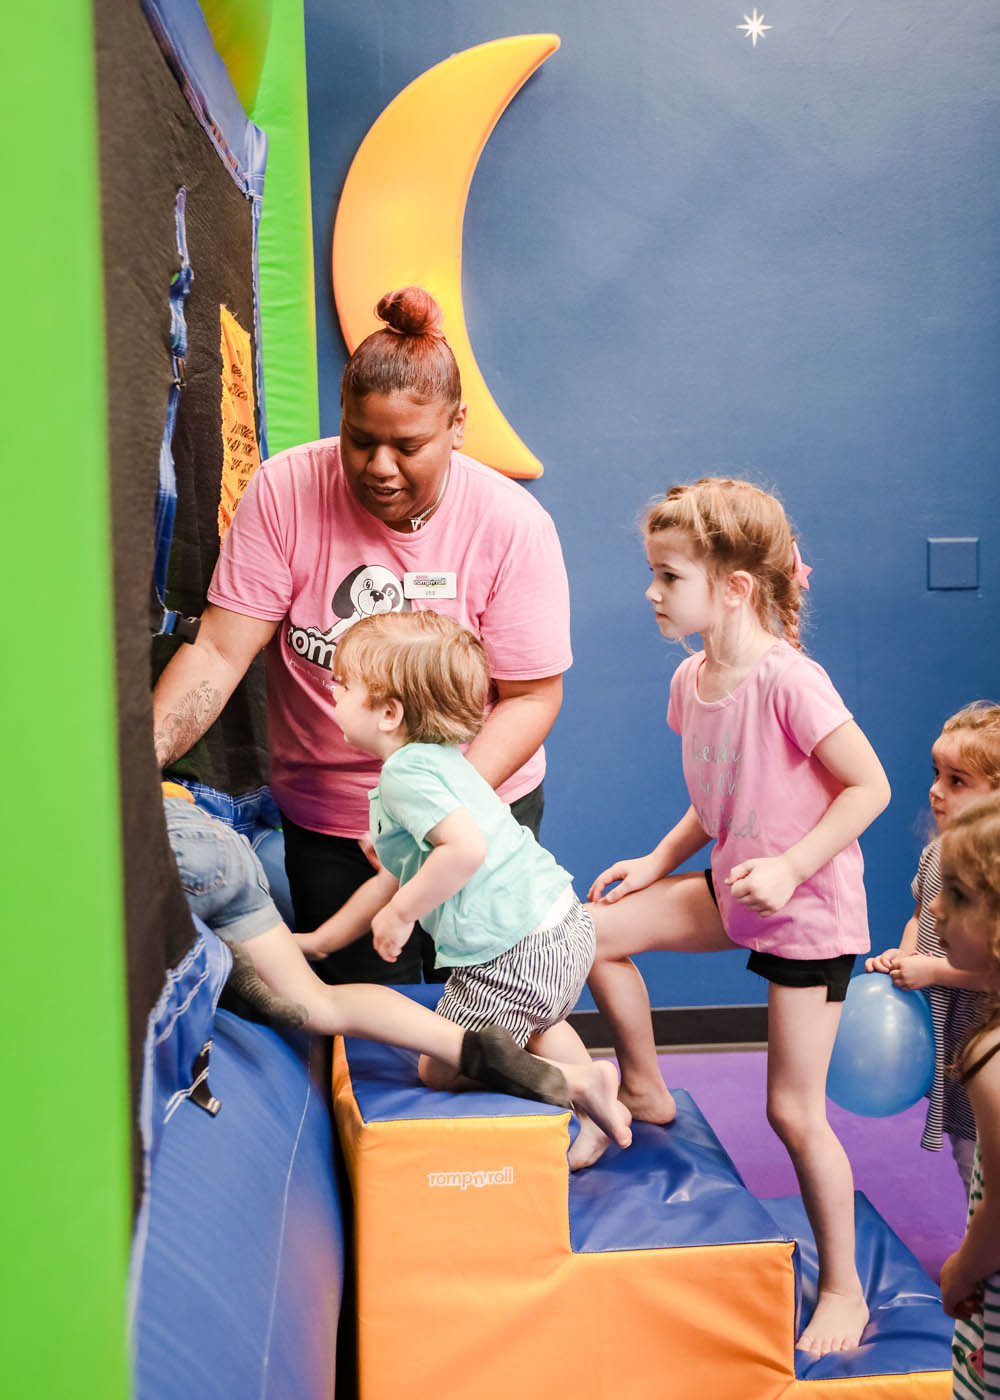 Romp n' Roll instructor helping children through gym play - learn who does well at Romp n' Roll